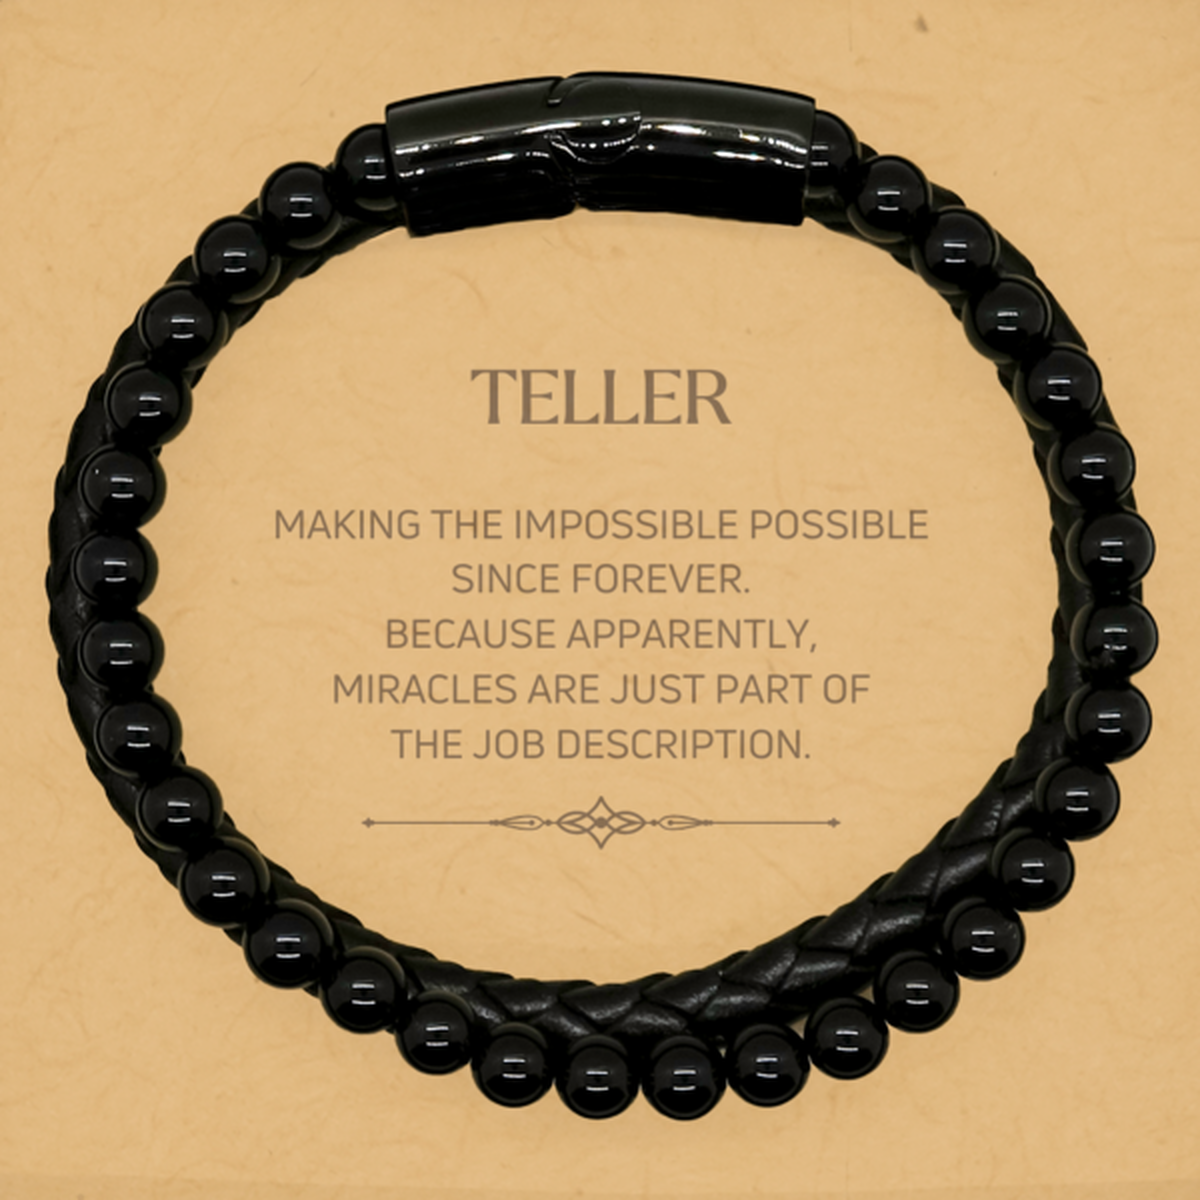 Funny Teller Gifts, Miracles are just part of the job description, Inspirational Birthday Stone Leather Bracelets For Teller, Men, Women, Coworkers, Friends, Boss